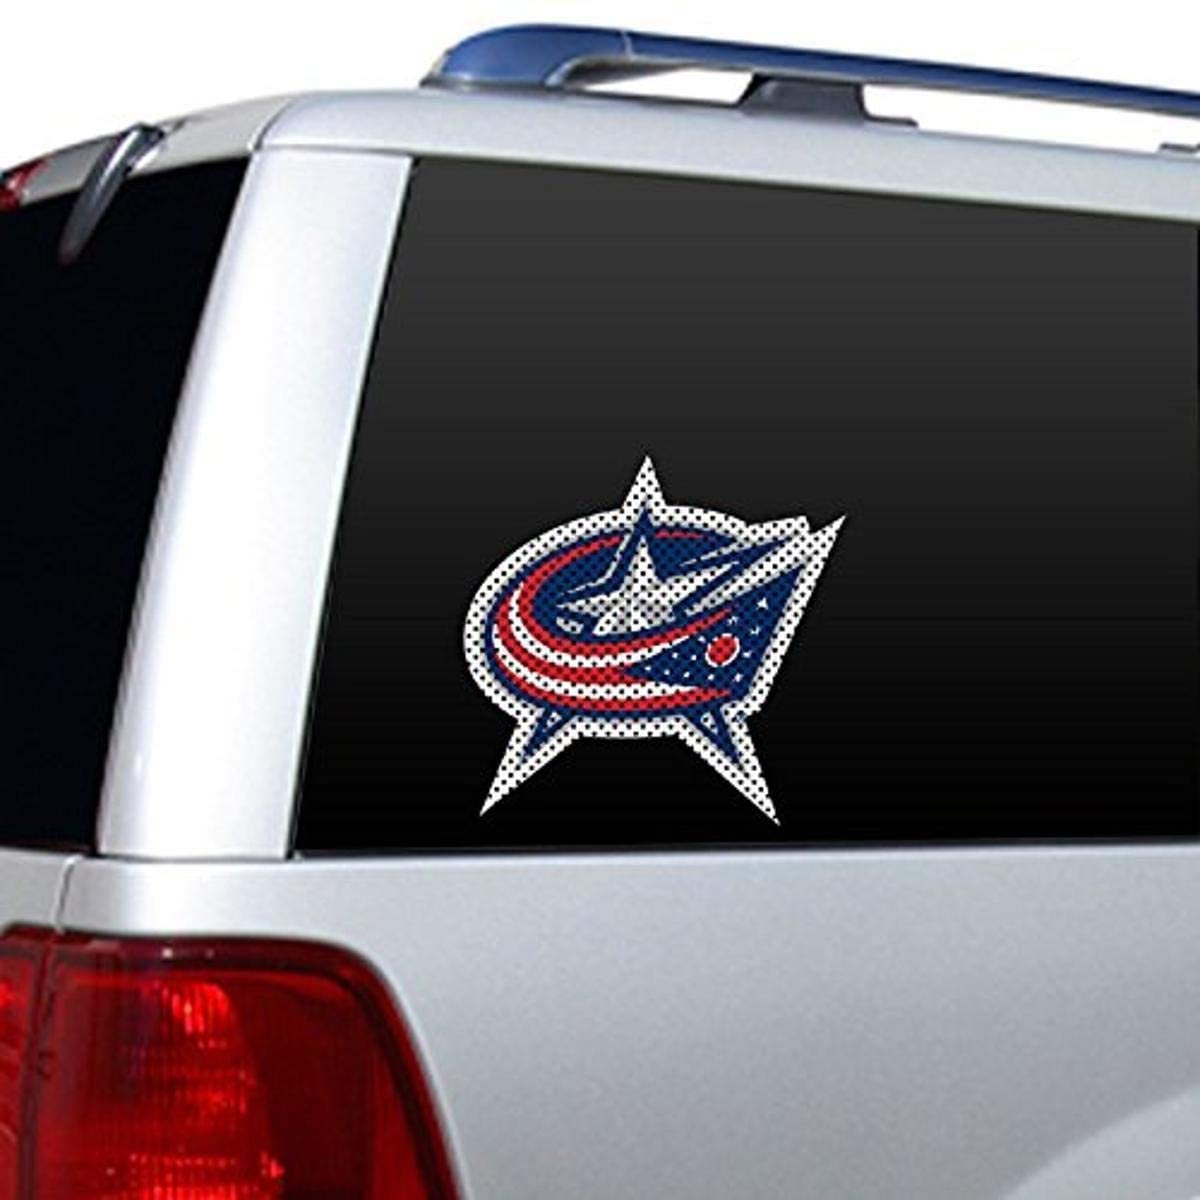 Columbus Blue Jackets 12 Inch Preforated Window Film Decal Sticker, One-Way Vision, Adhesive Backing